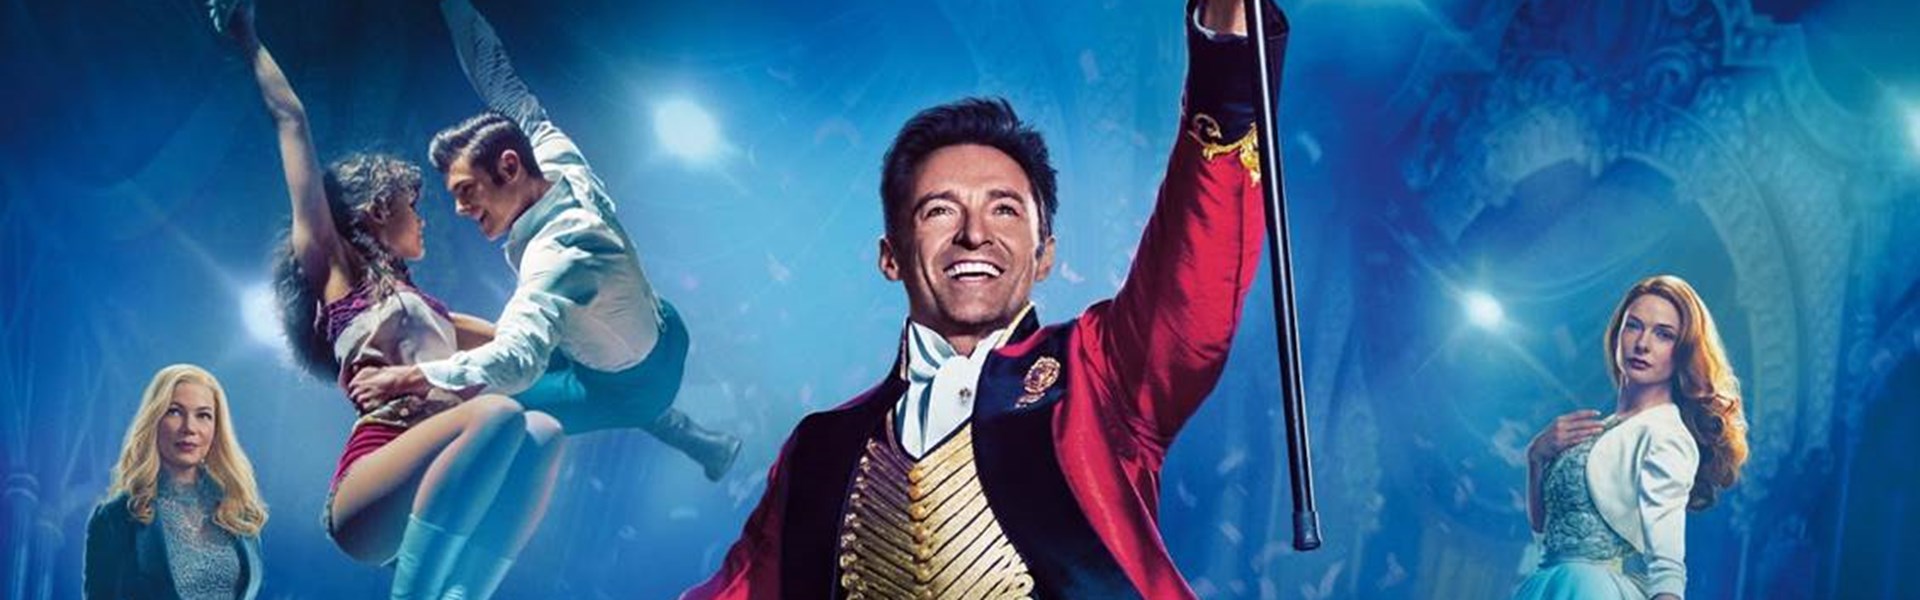 Beacon Park Drive In Movie: The Greatest Showman (PG)